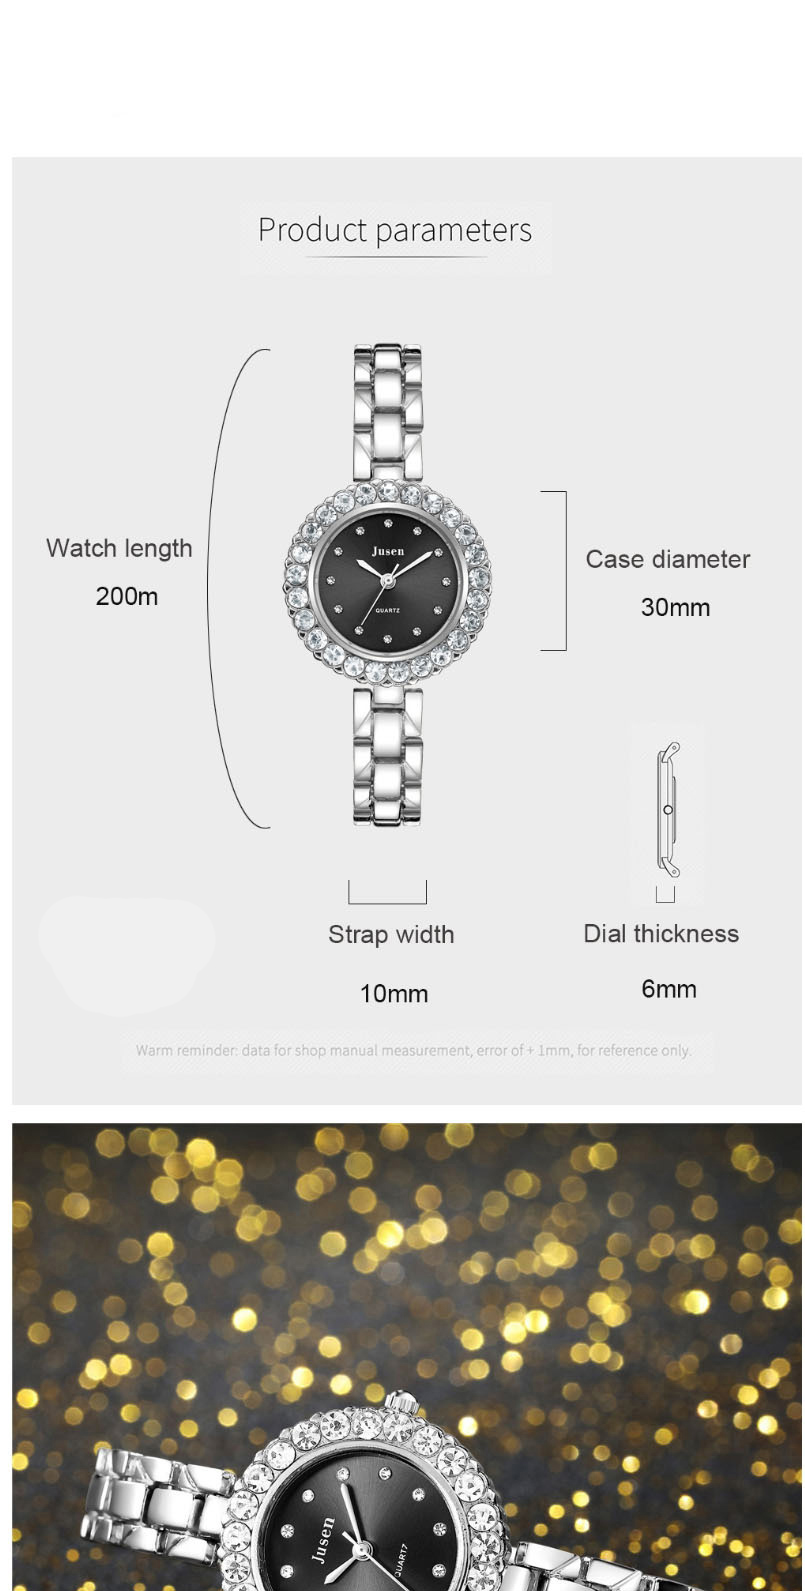 Fashion Rose Gold With White Surface Diamond Bracelet Watch With Diamonds,Ladies Watches